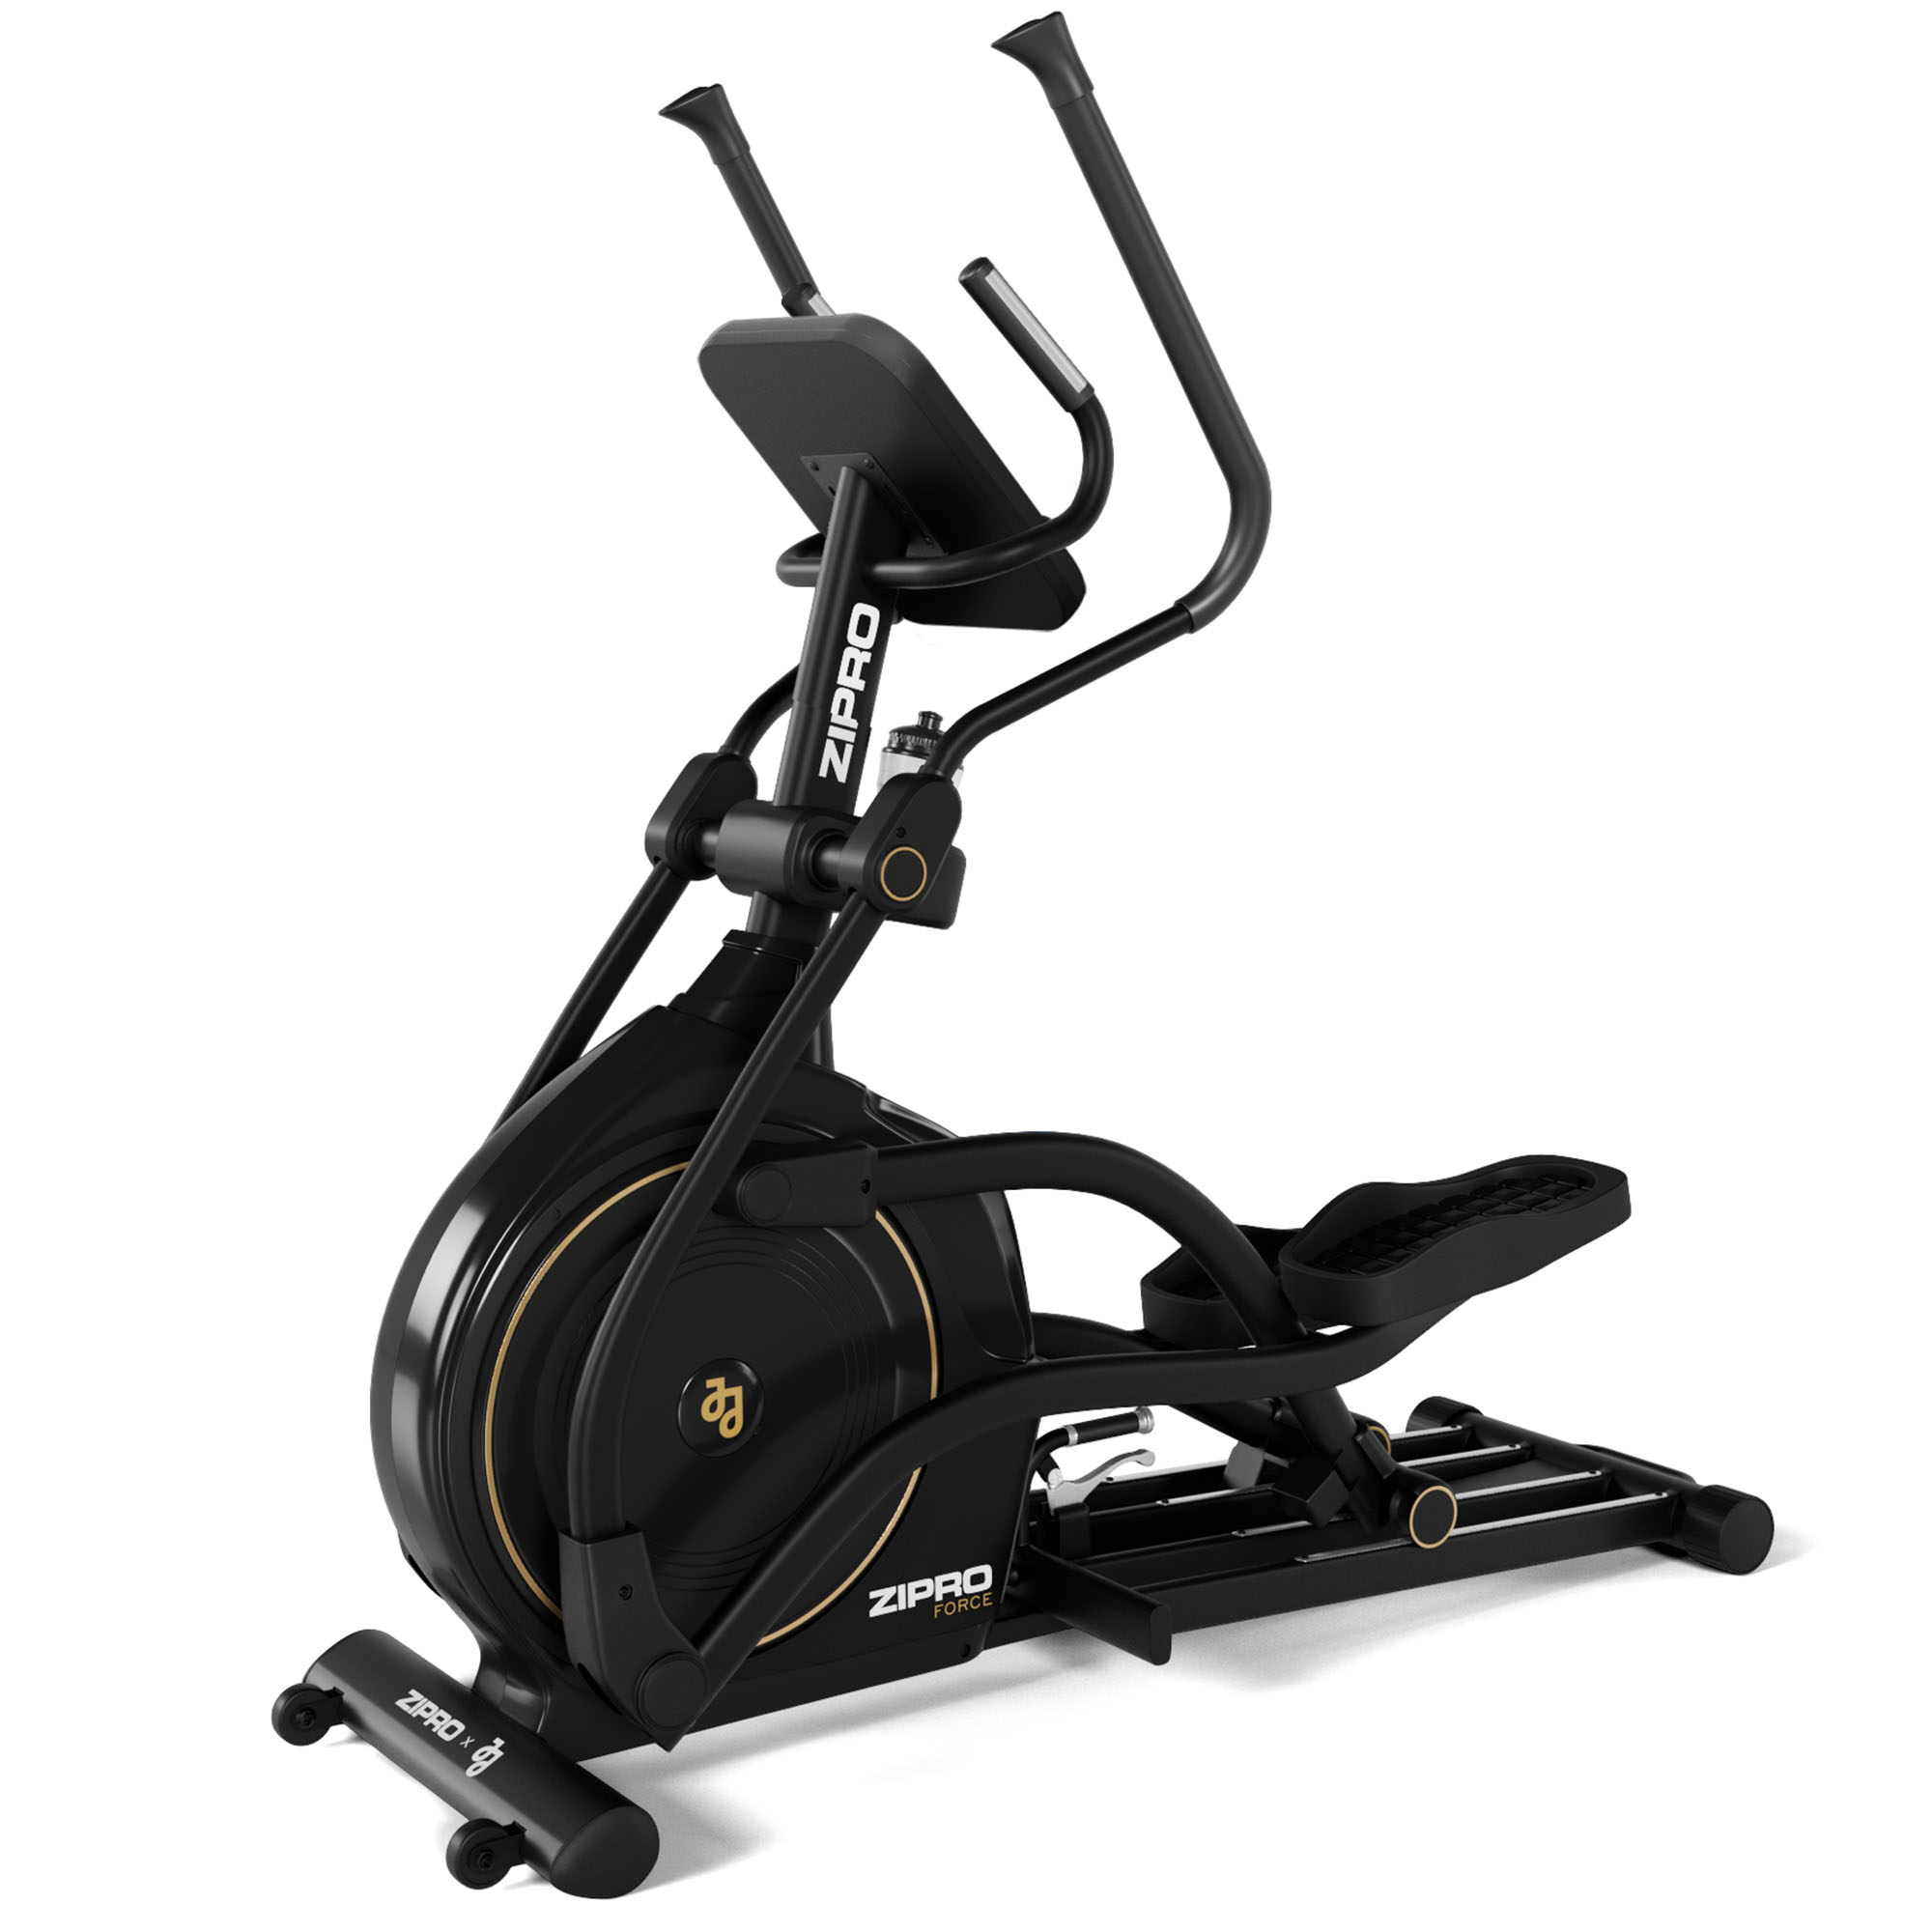 ZIPRO Force Schawrz Crosstrainer, Gold iConsole